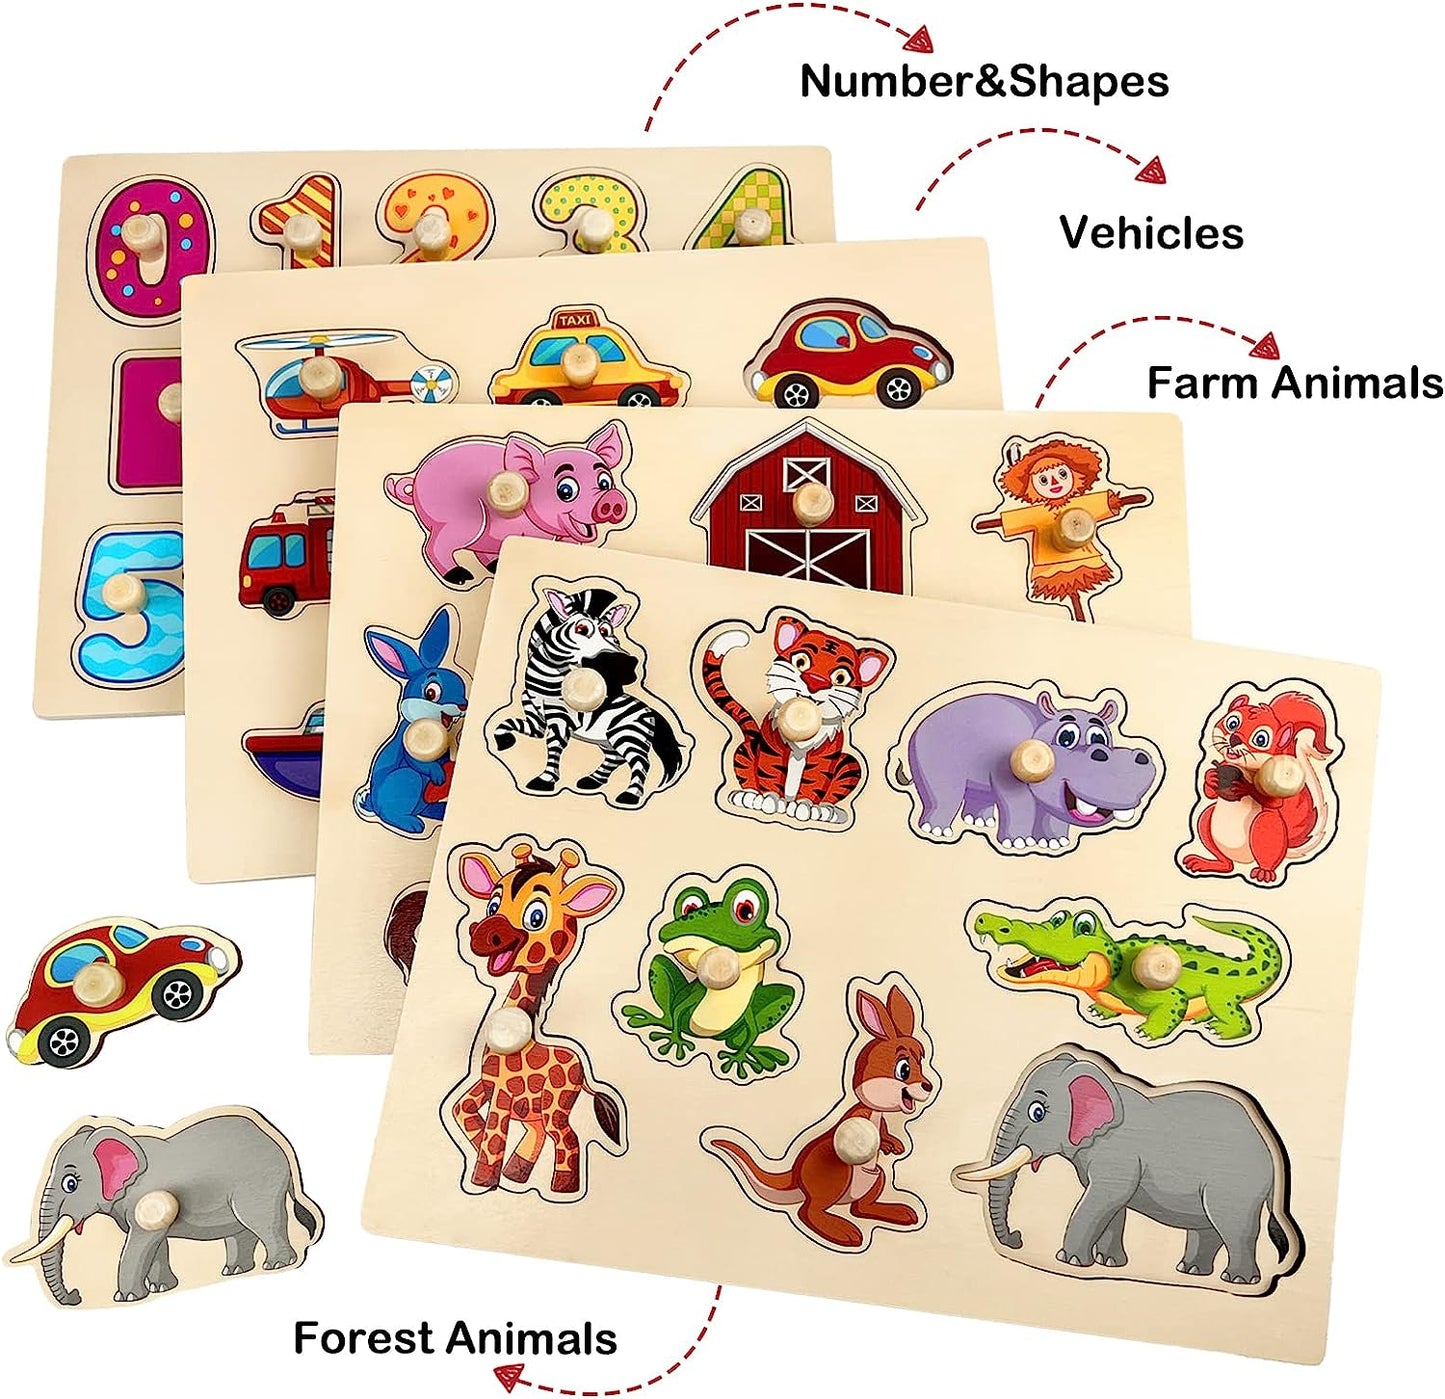 Wooden Peg Puzzles for Toddlers, 4 Pack Toddler Puzzles Set with Wooden Knobs, Preschool Learning Educational Animals Numbers Vehicles Pegged Puzzle Toys for 2 3 Year Old (Style 2)